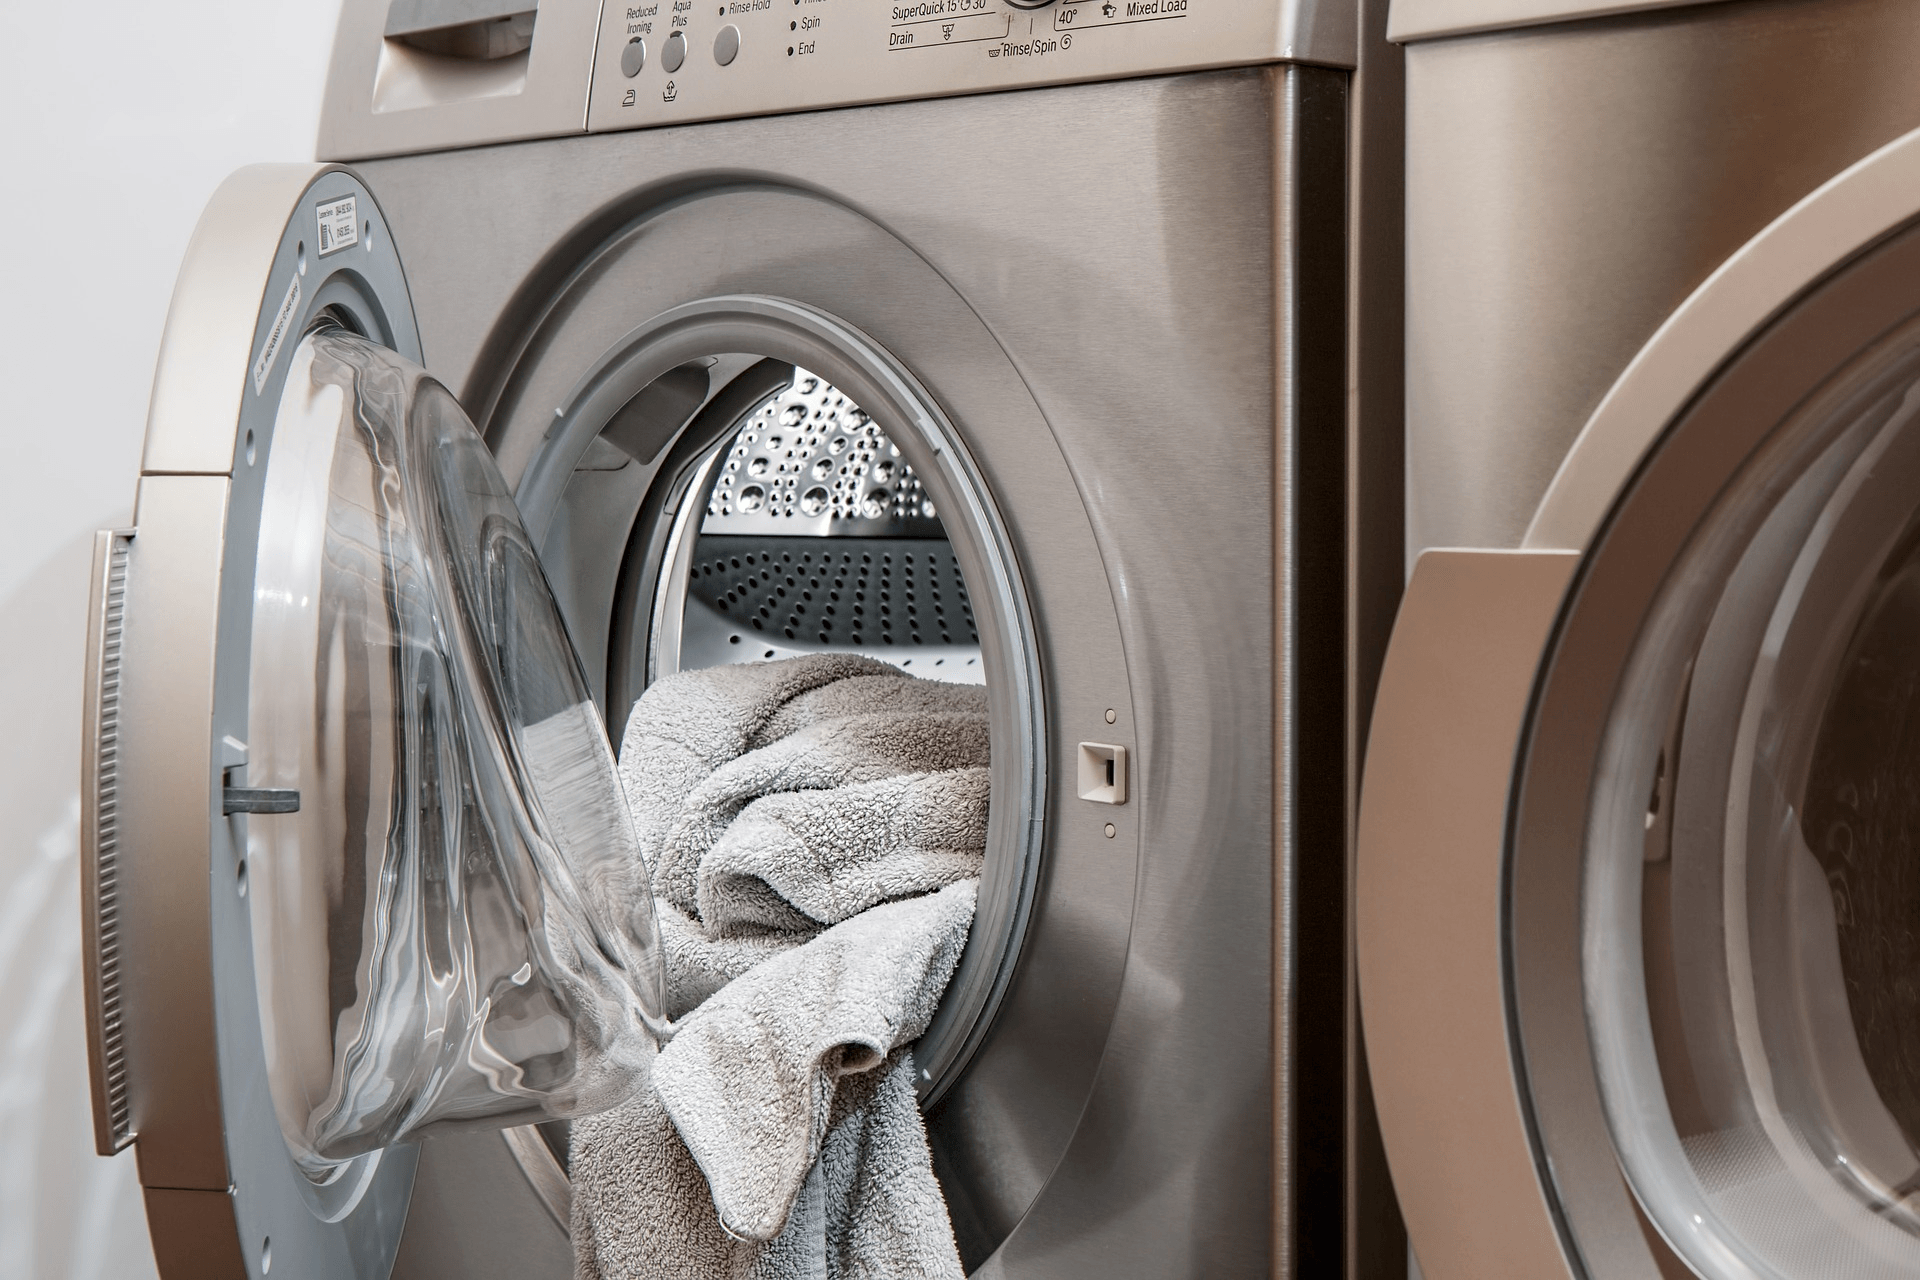 Put bleach in your washer